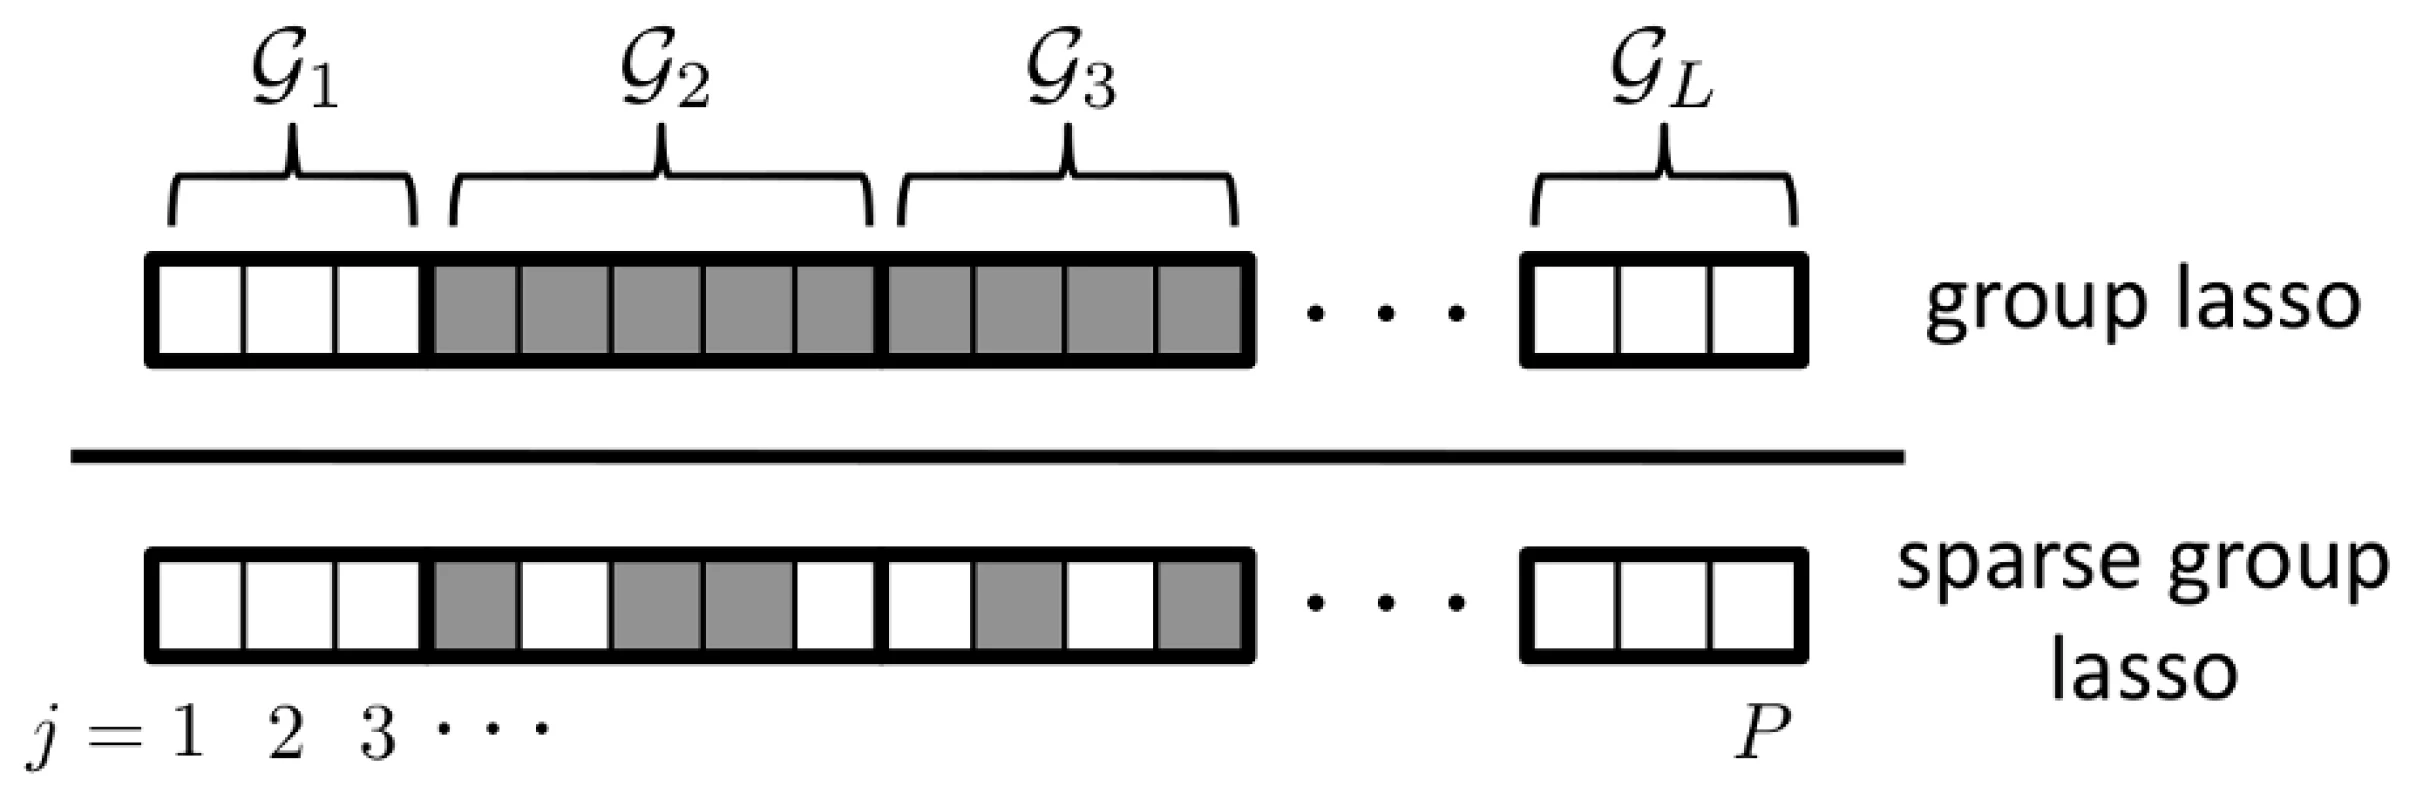 Sparsity patterns enforced by the group lasso and sparse group lasso.